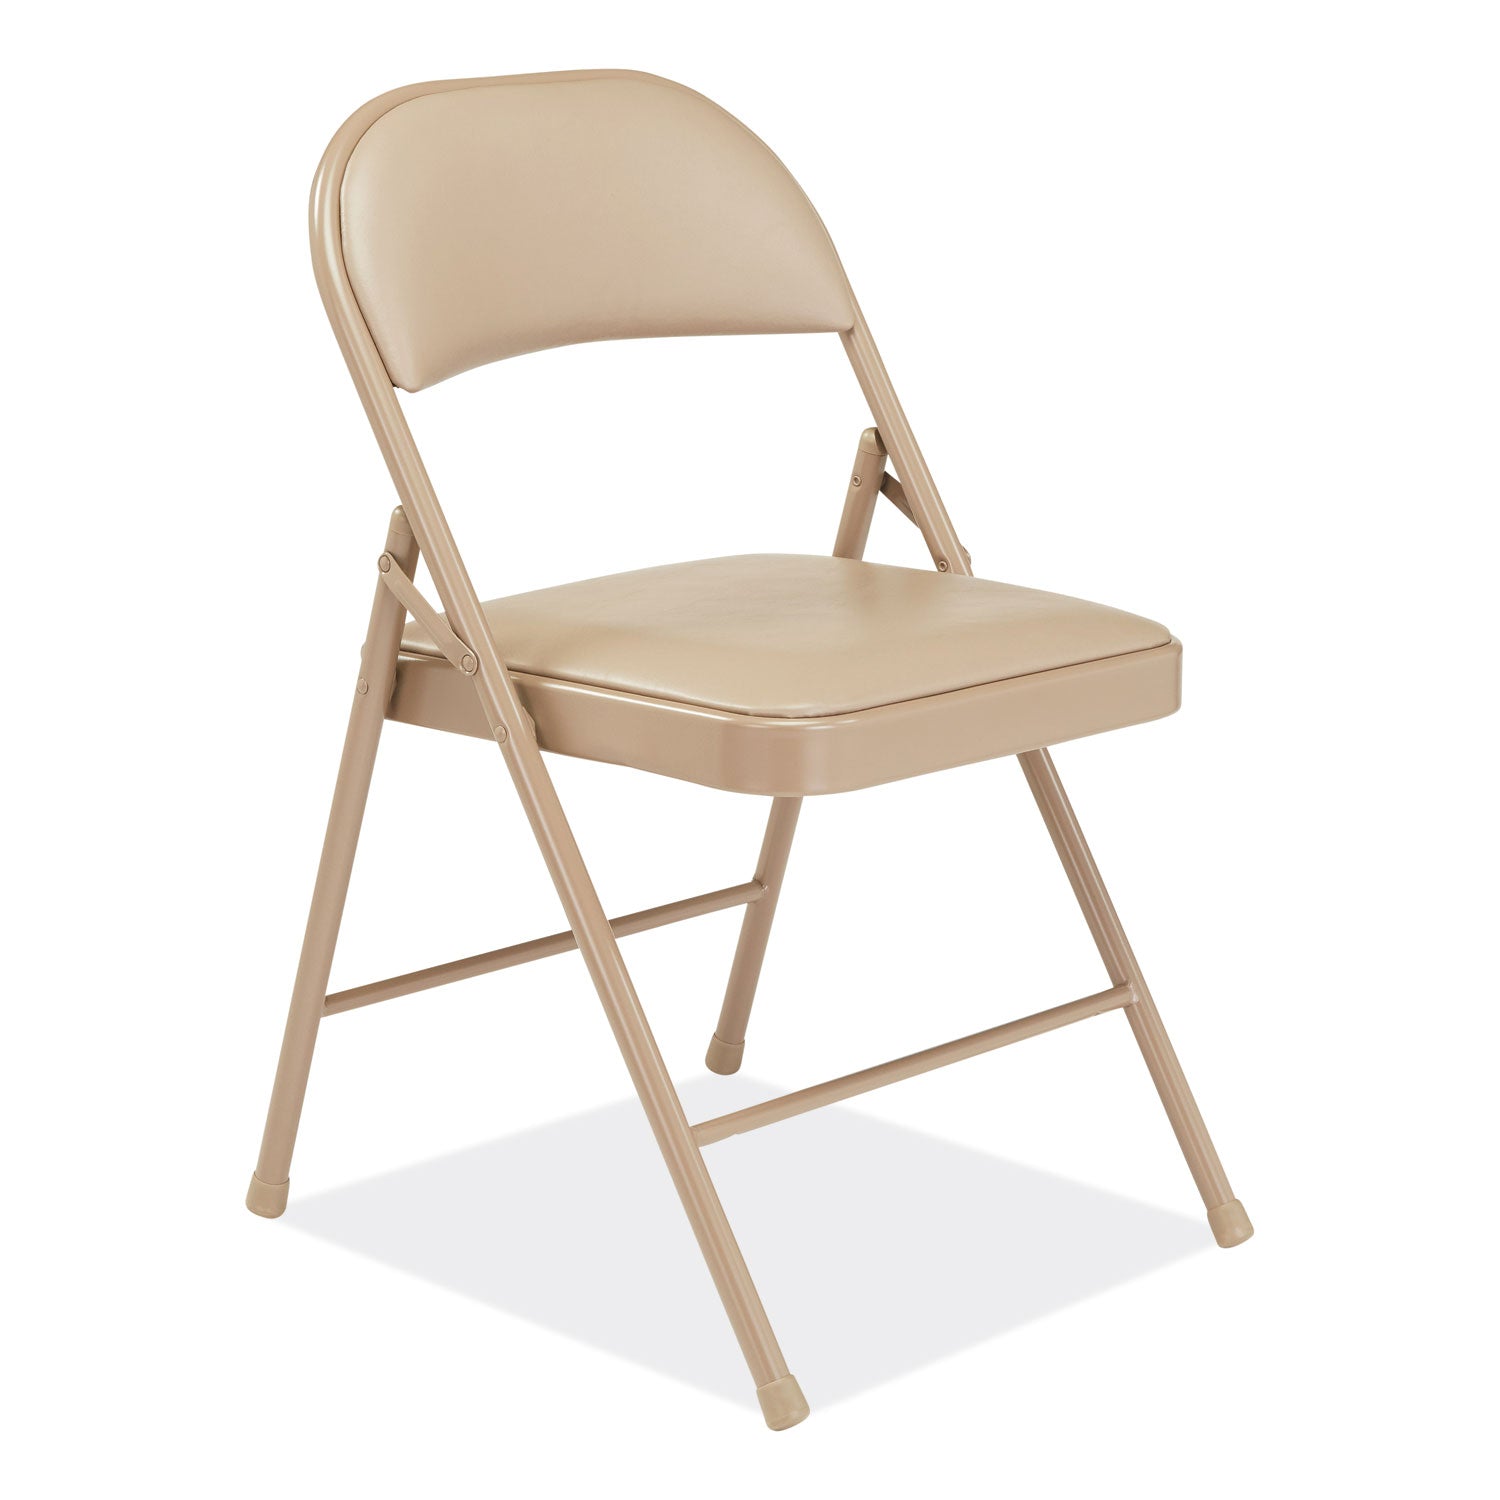 950-series-vinyl-padded-steel-folding-chair-supports-up-to-250-lb-1775-seat-height-beige-4-cartonships-in-1-3-bus-days_nps951 - 2